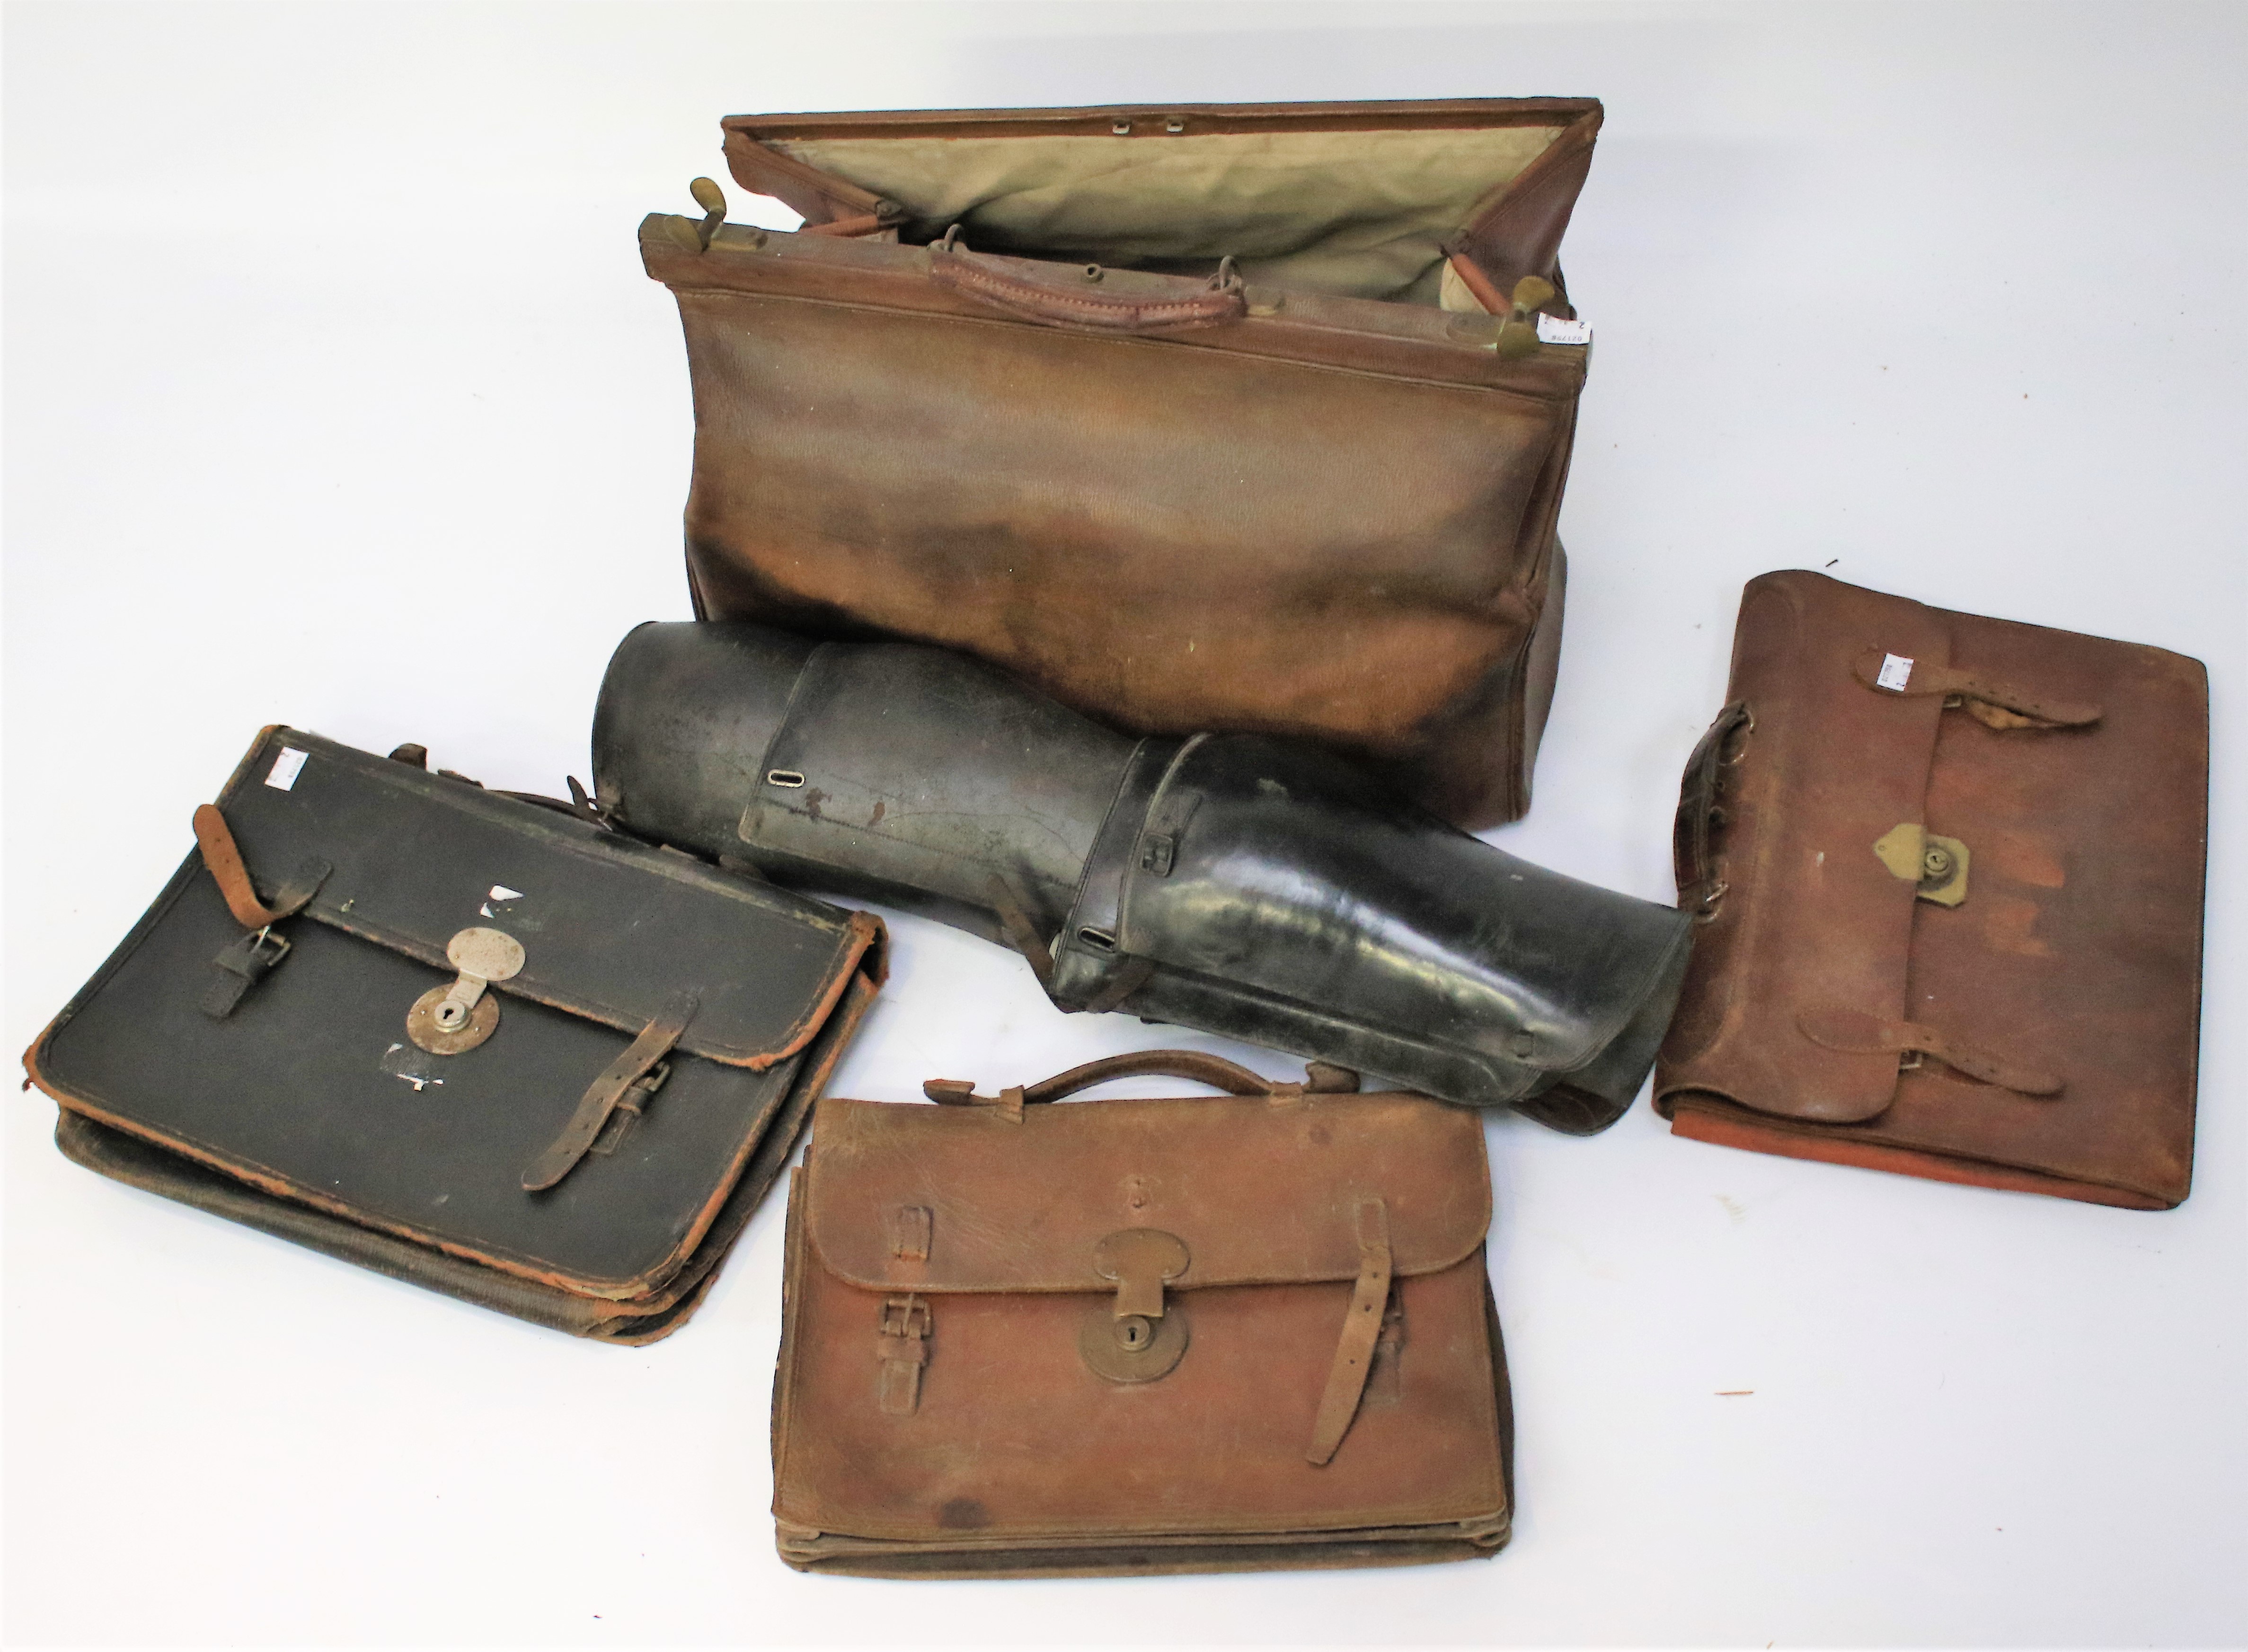 A vintage Gladstone bag and three other bags.